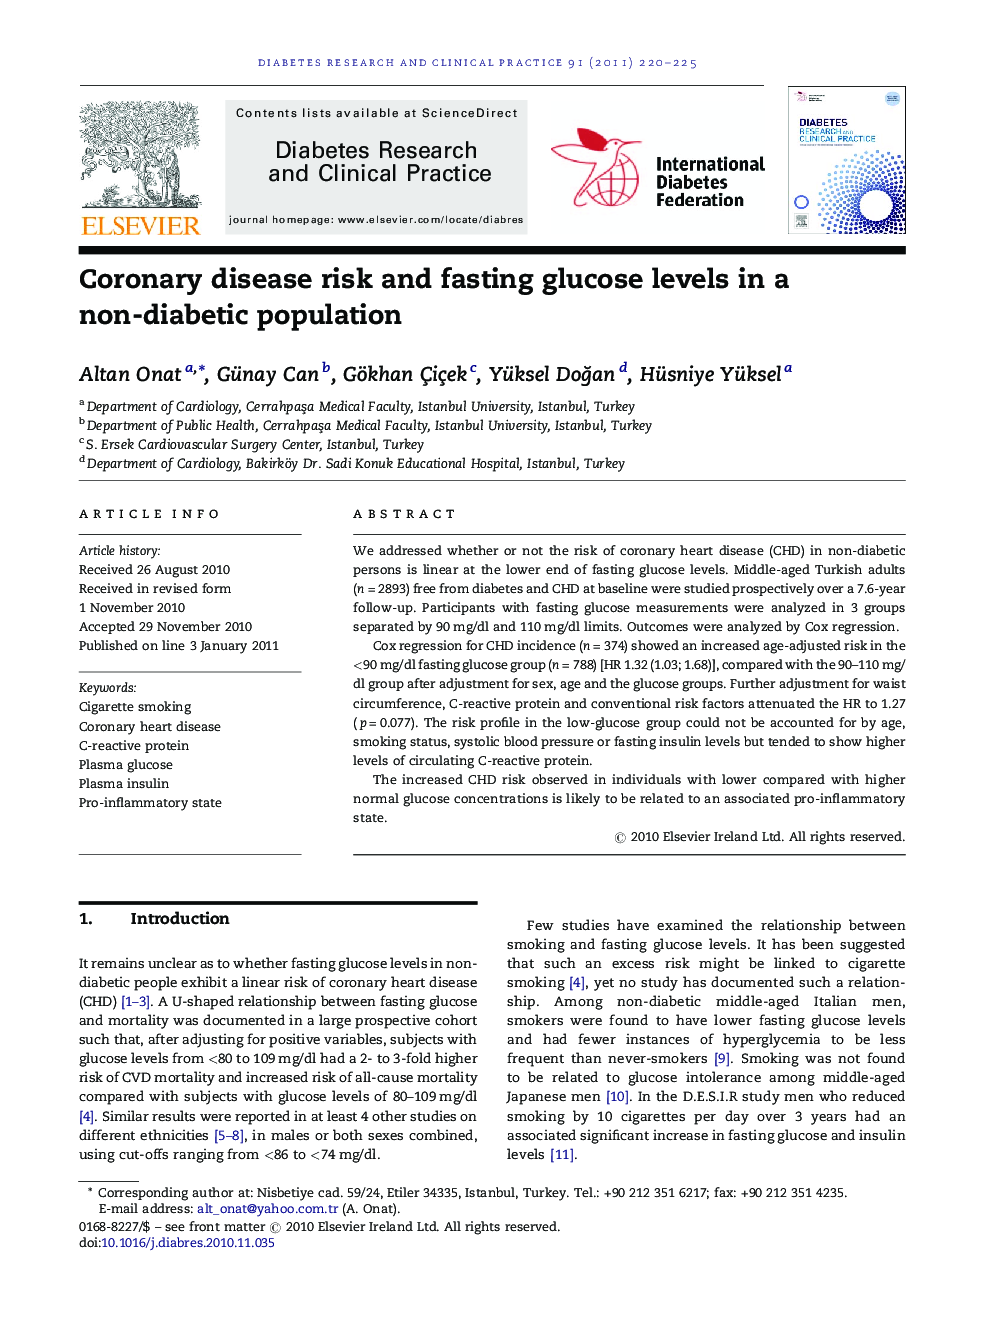 Coronary disease risk and fasting glucose levels in a non-diabetic population